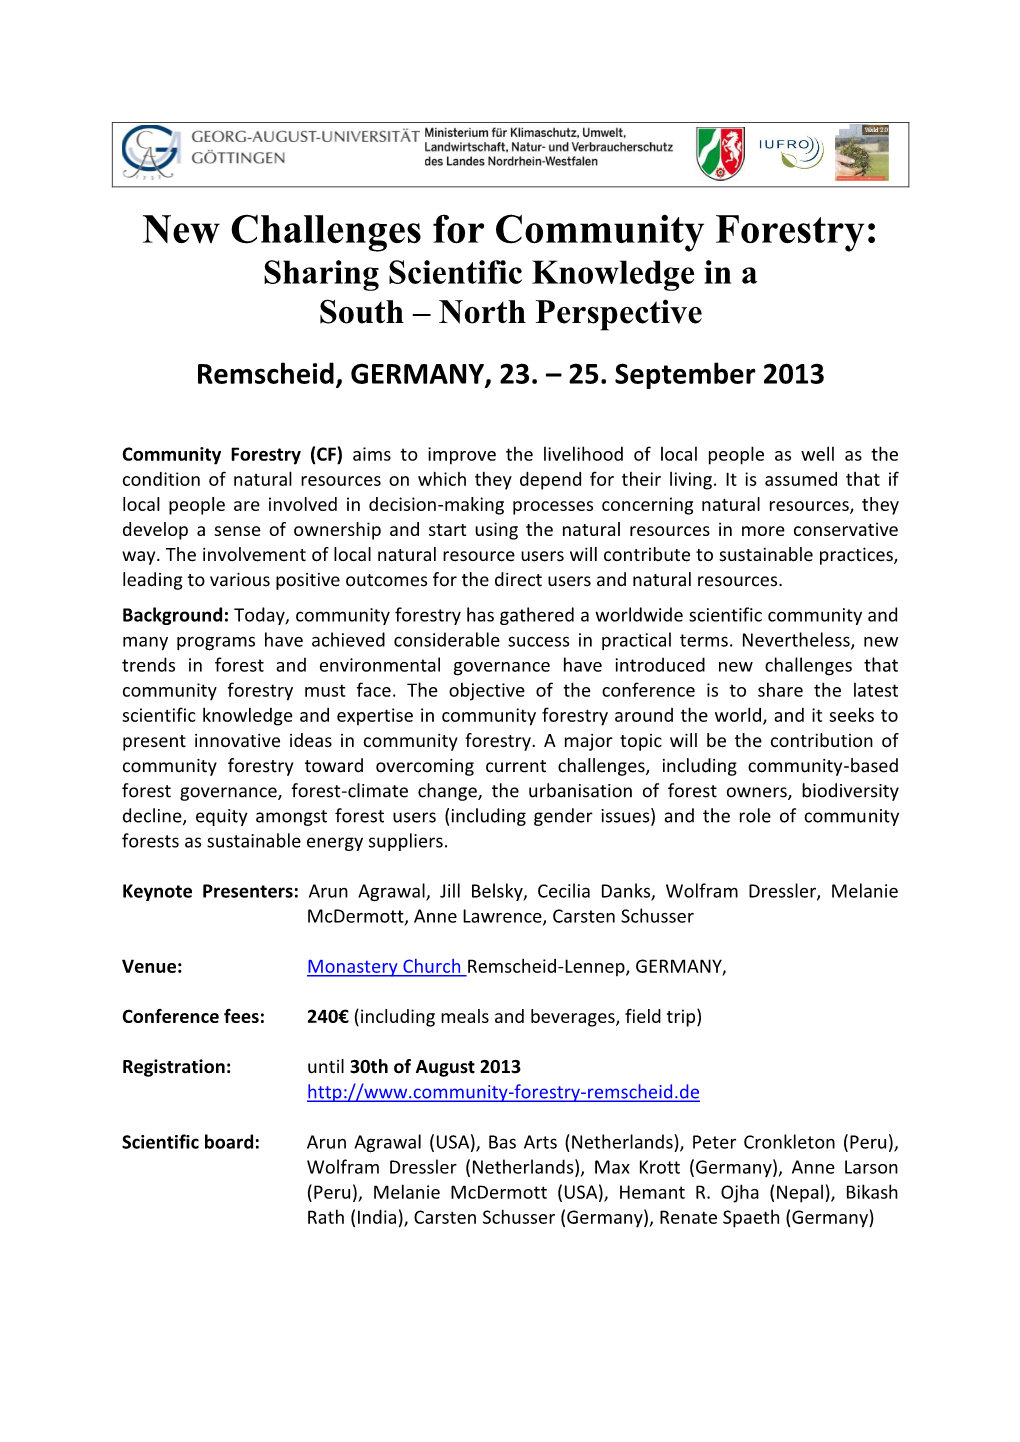 New Challenges for Community Forestry: Sharing Scientific Knowledge in a South – North Perspective Remscheid, GERMANY, 23